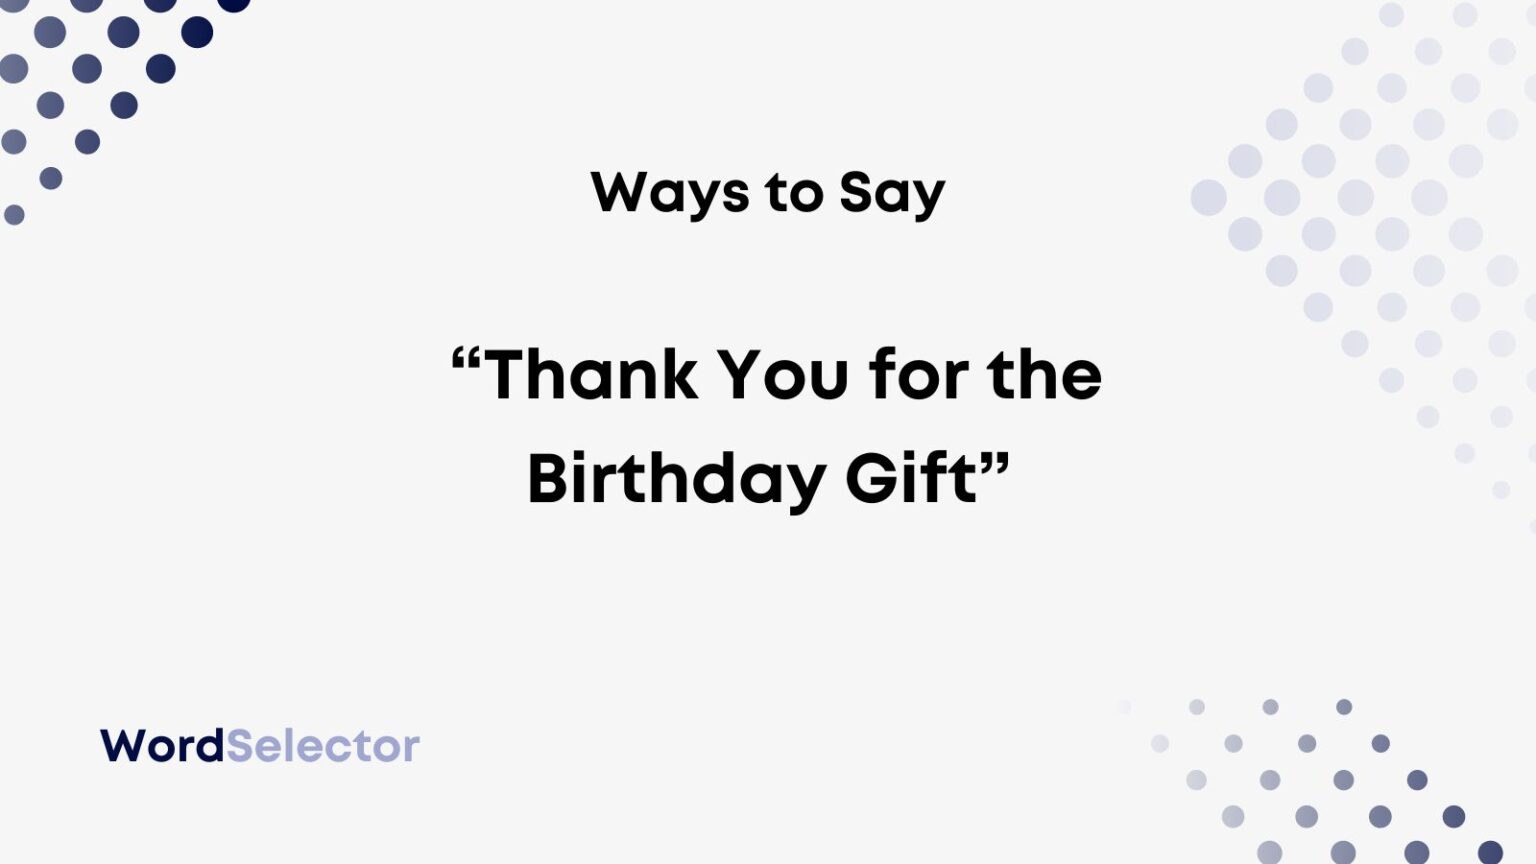 10-ways-to-say-thank-you-for-the-birthday-gift-wordselector